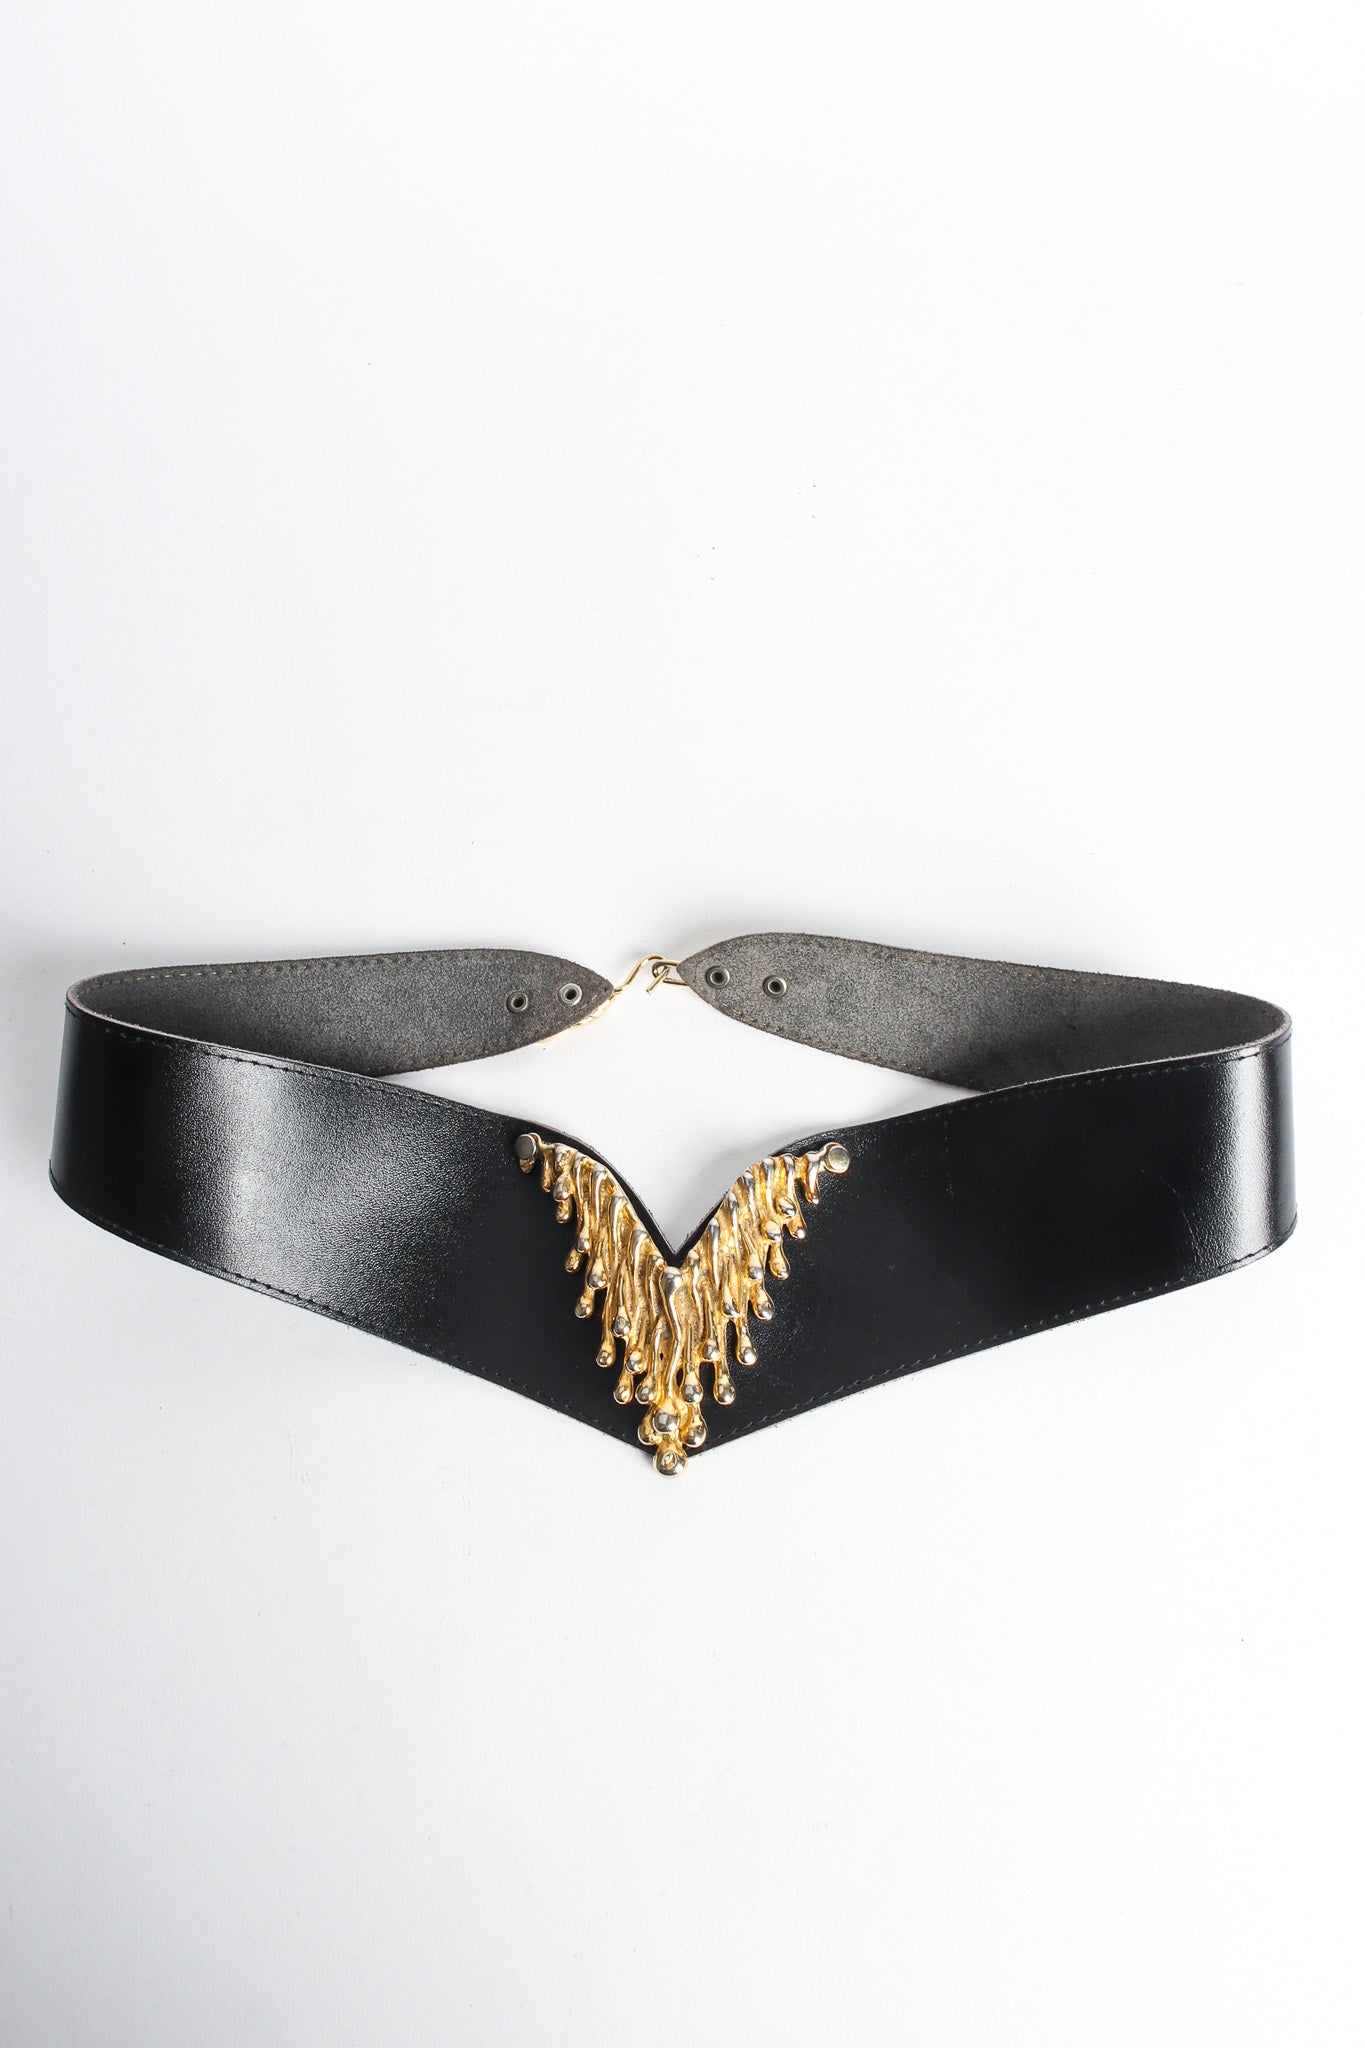 Black leather vintage wing shape belt with dripping gold V accent loop flat lay @recessla